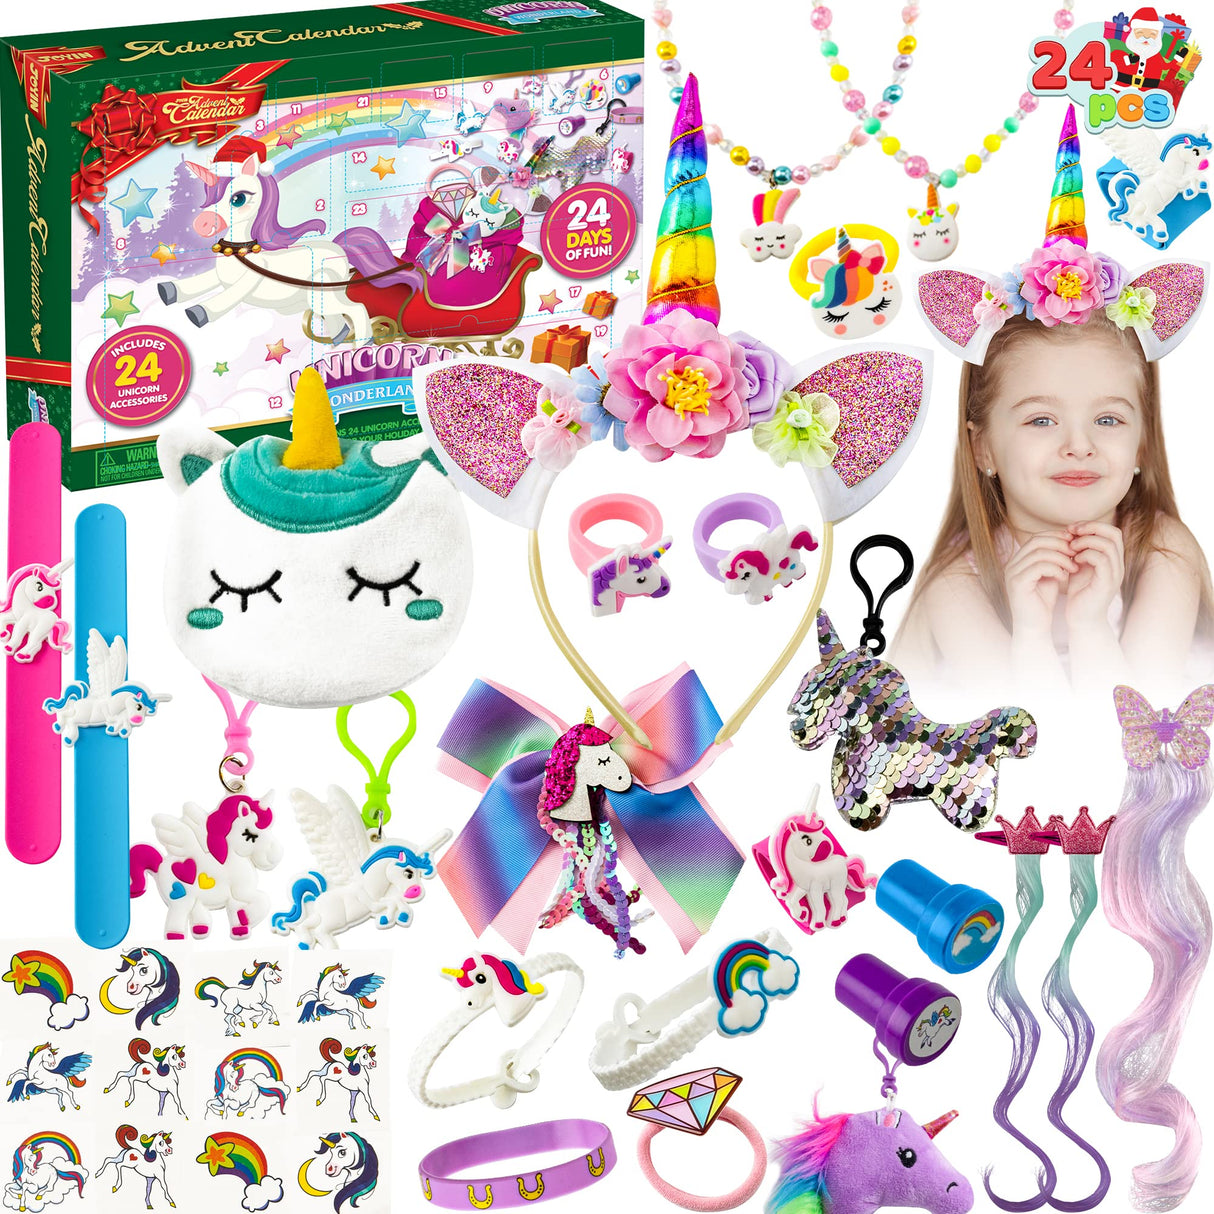 JOYIN 2023 Advent Calendar Christmas 24 Days Countdown Advent Calendar with 47 Unicorn Accessories Including Unicorn Jewelry, Necklace, Bracelets, Headband Stickers, Stamps and Rings for Kids Christmas Party Favor Gifts